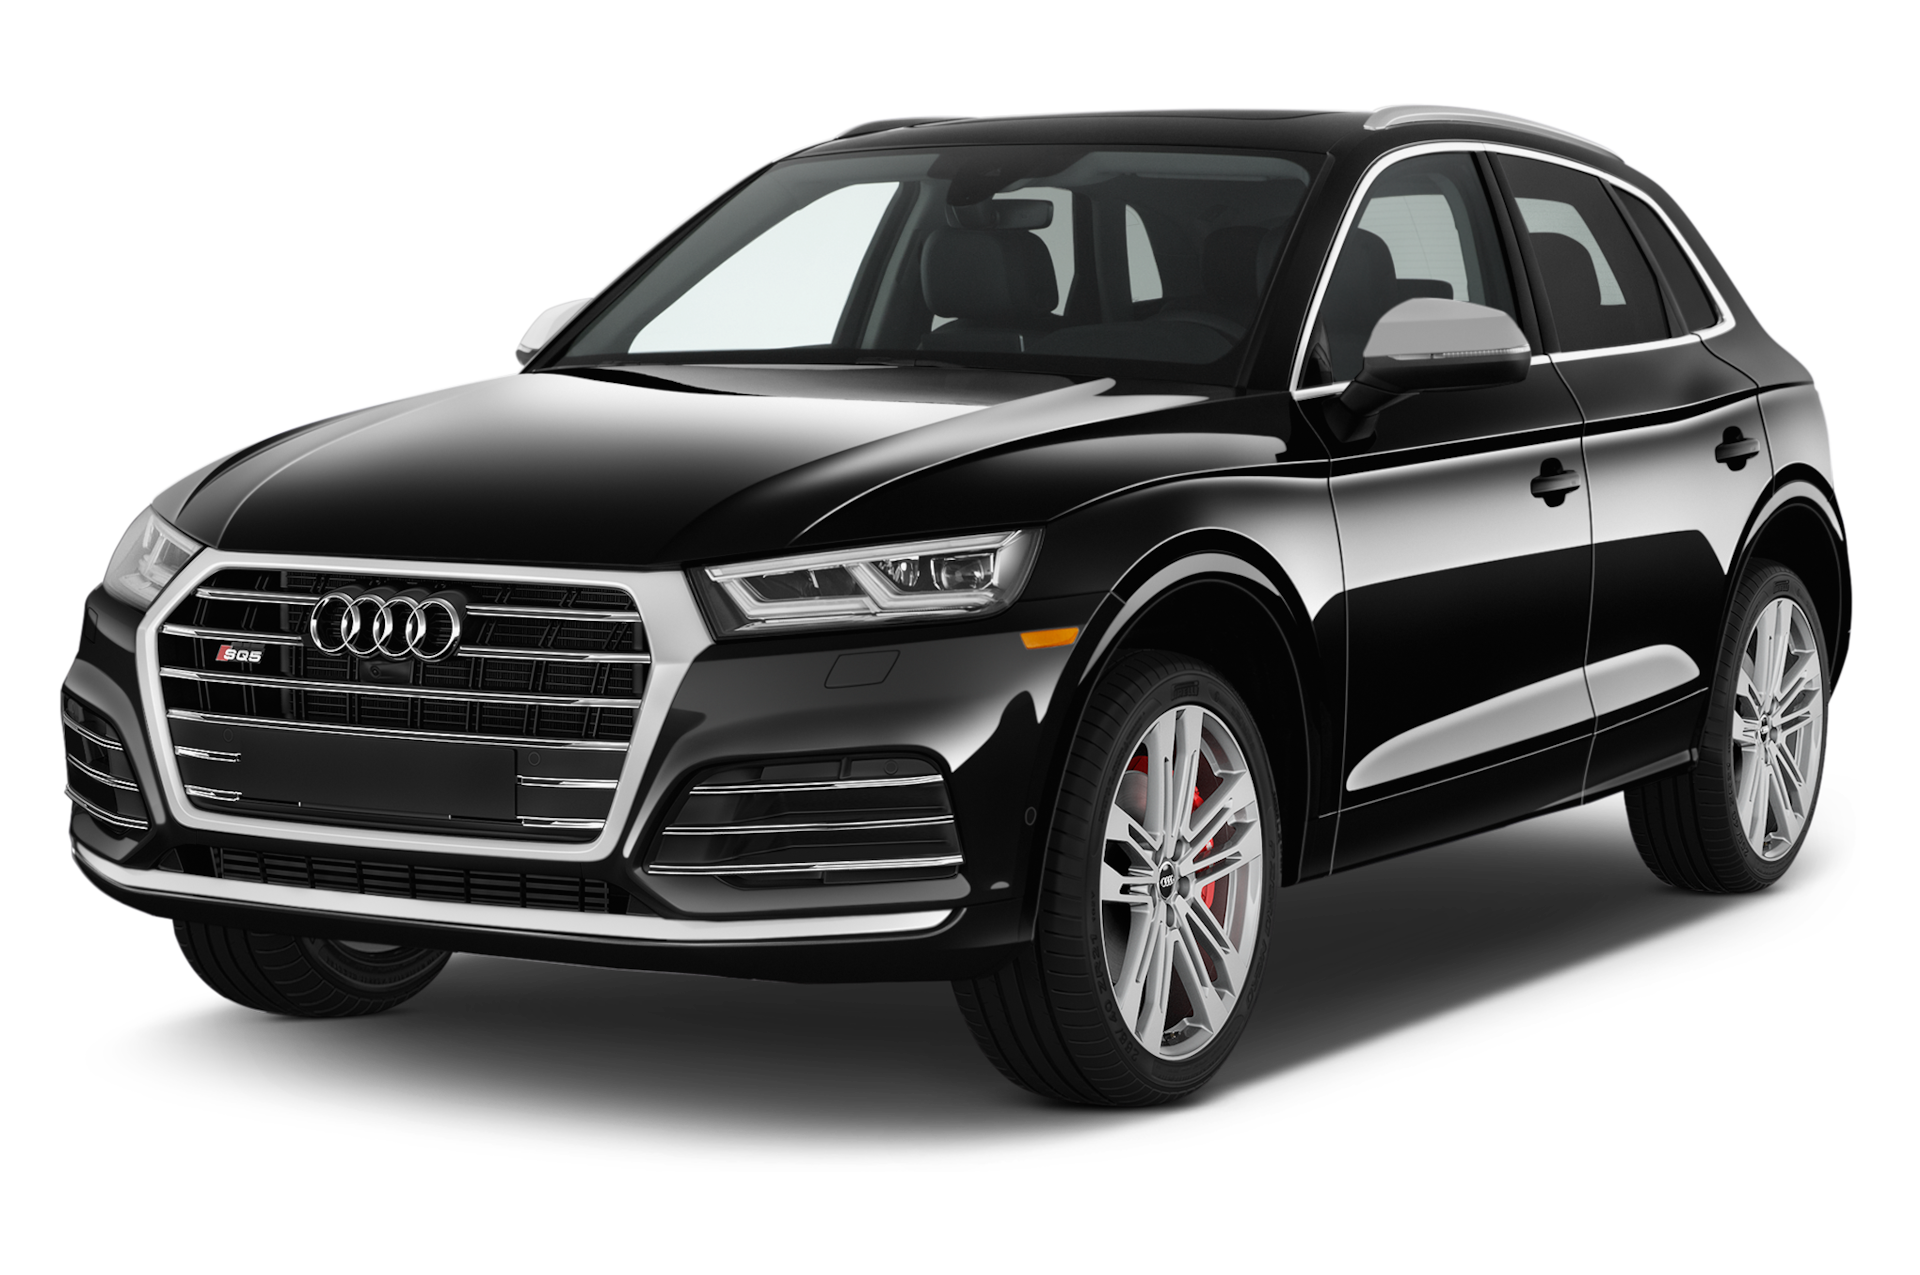 2018 Audi SQ5 Prices, Reviews, and Photos - MotorTrend